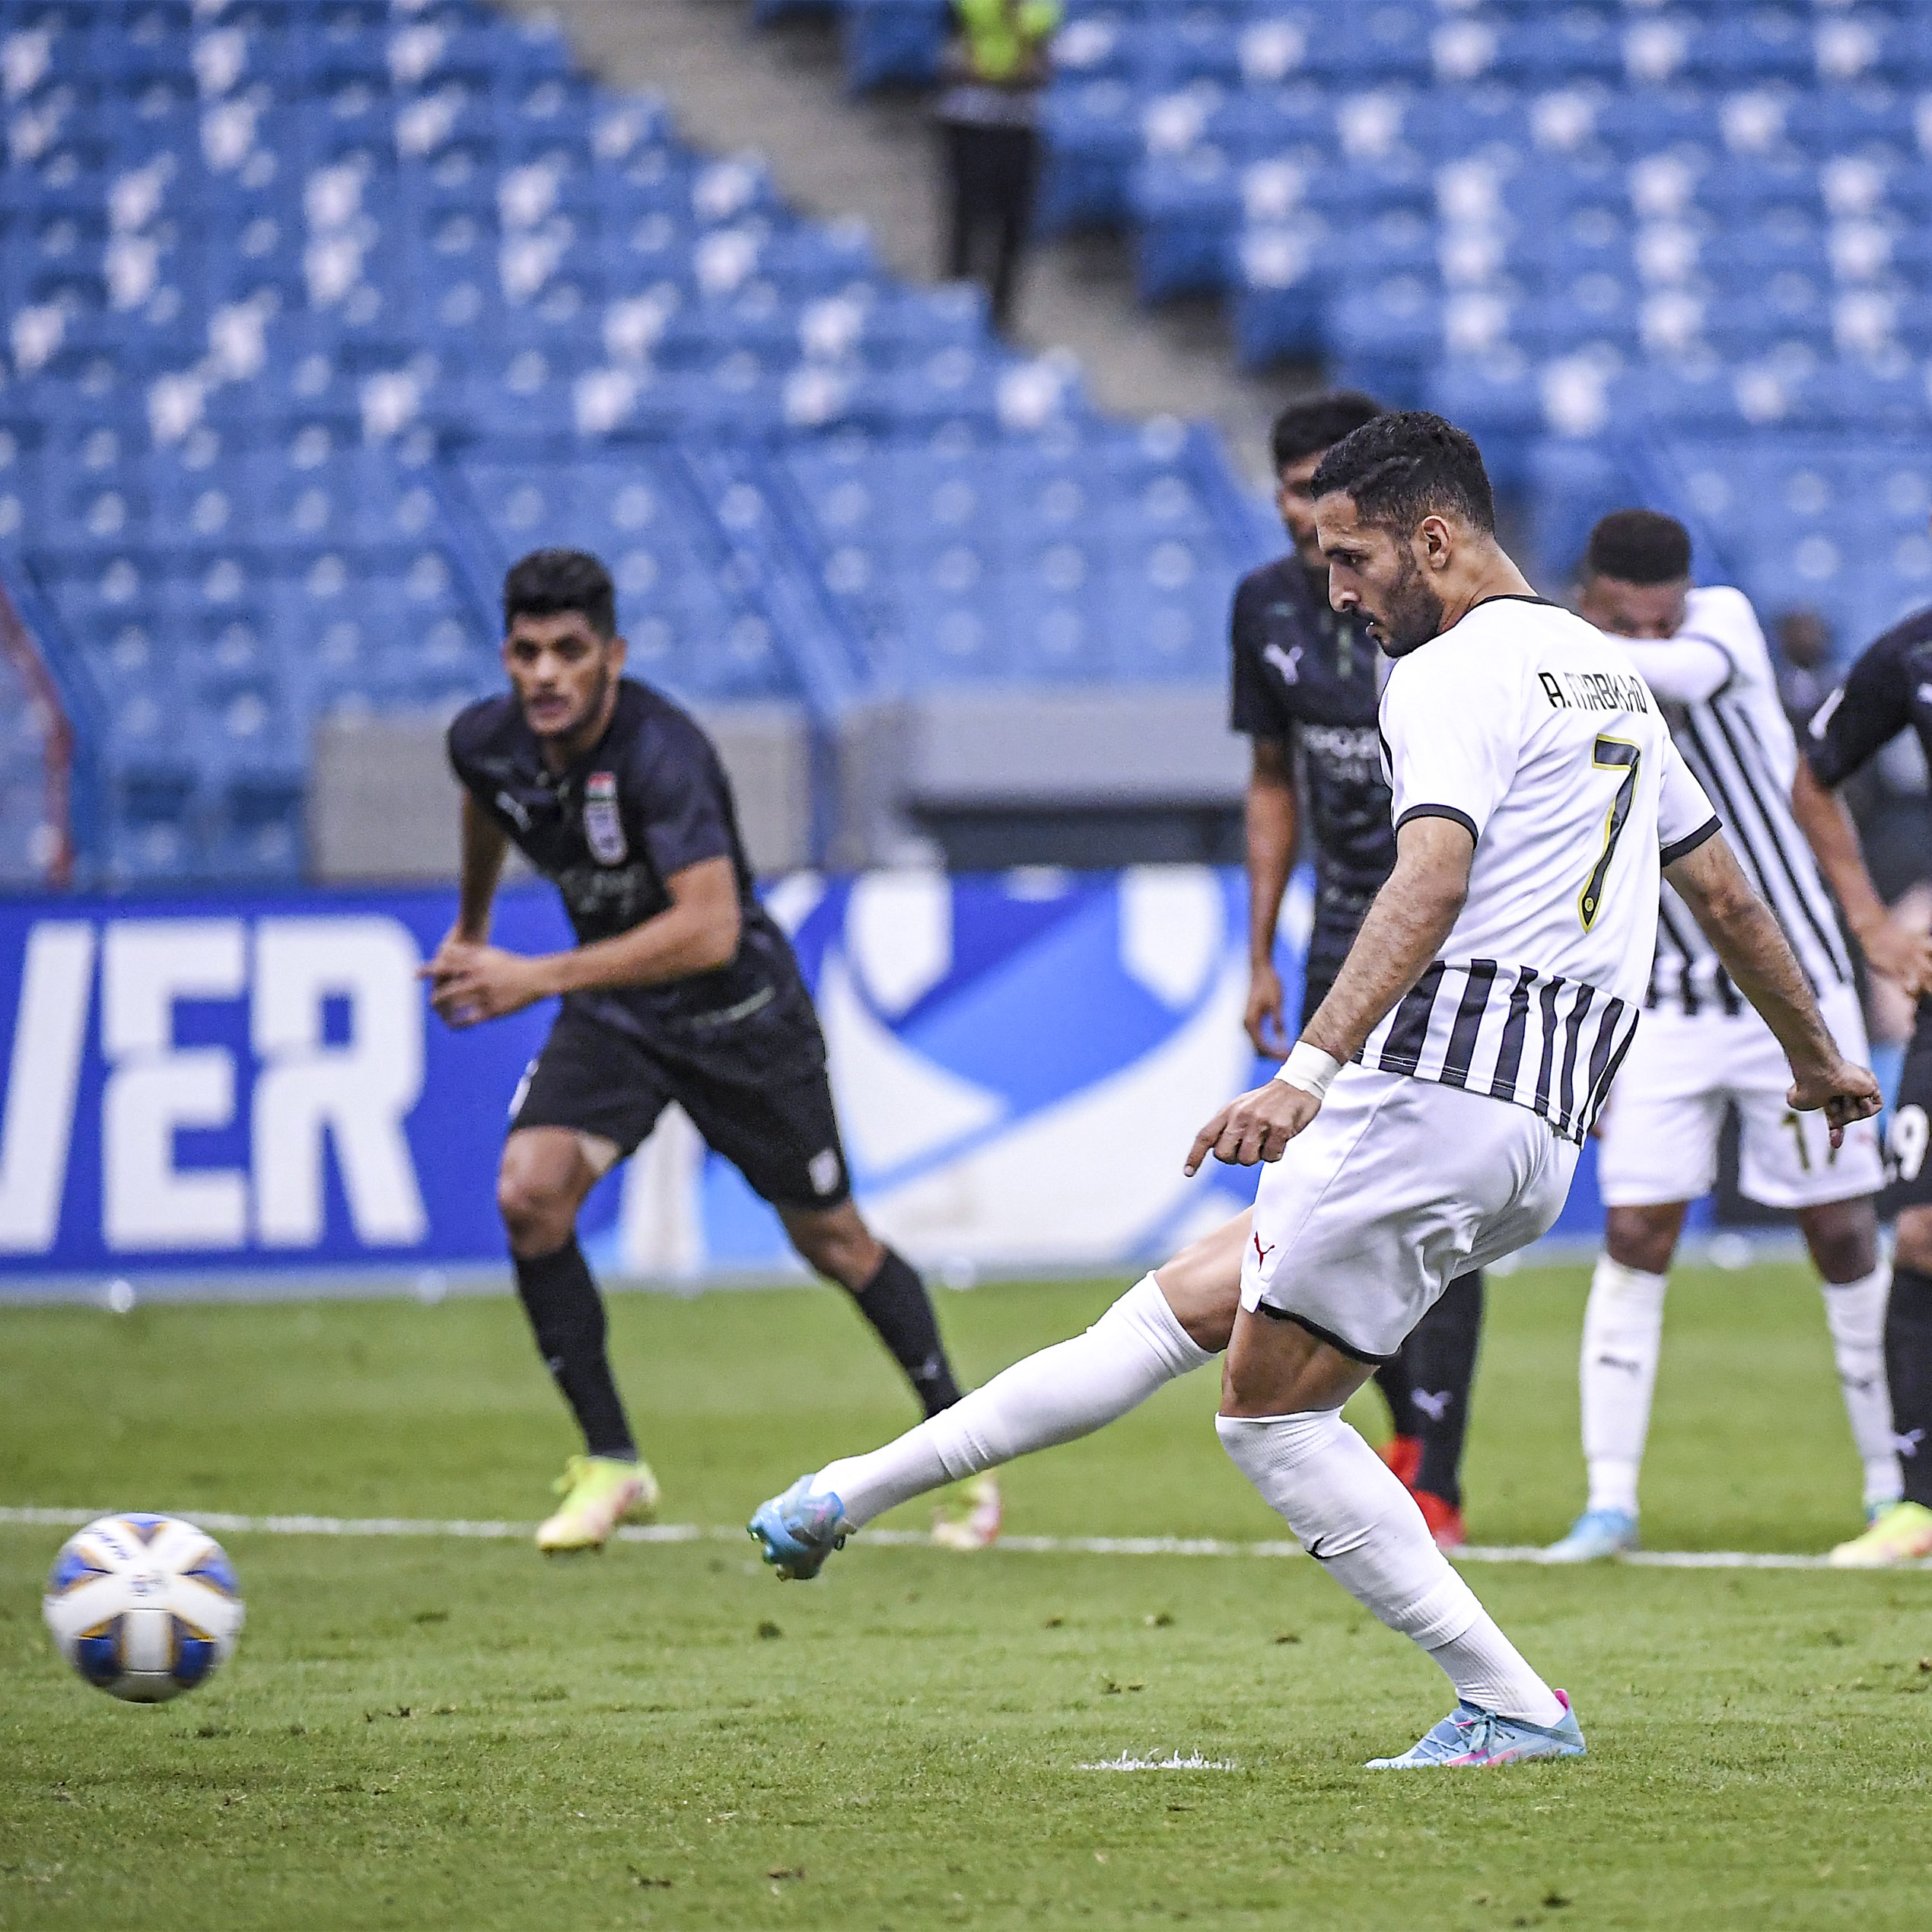 AFC Champions League 2022: Mumbai City suffer 2nd defeat in the AFCCL 2022 as Ali Mabkhout strikes from the penalty spot, Mumbai City FC lose 1-0 to Al Jazira: Check HIGHLIGHTS